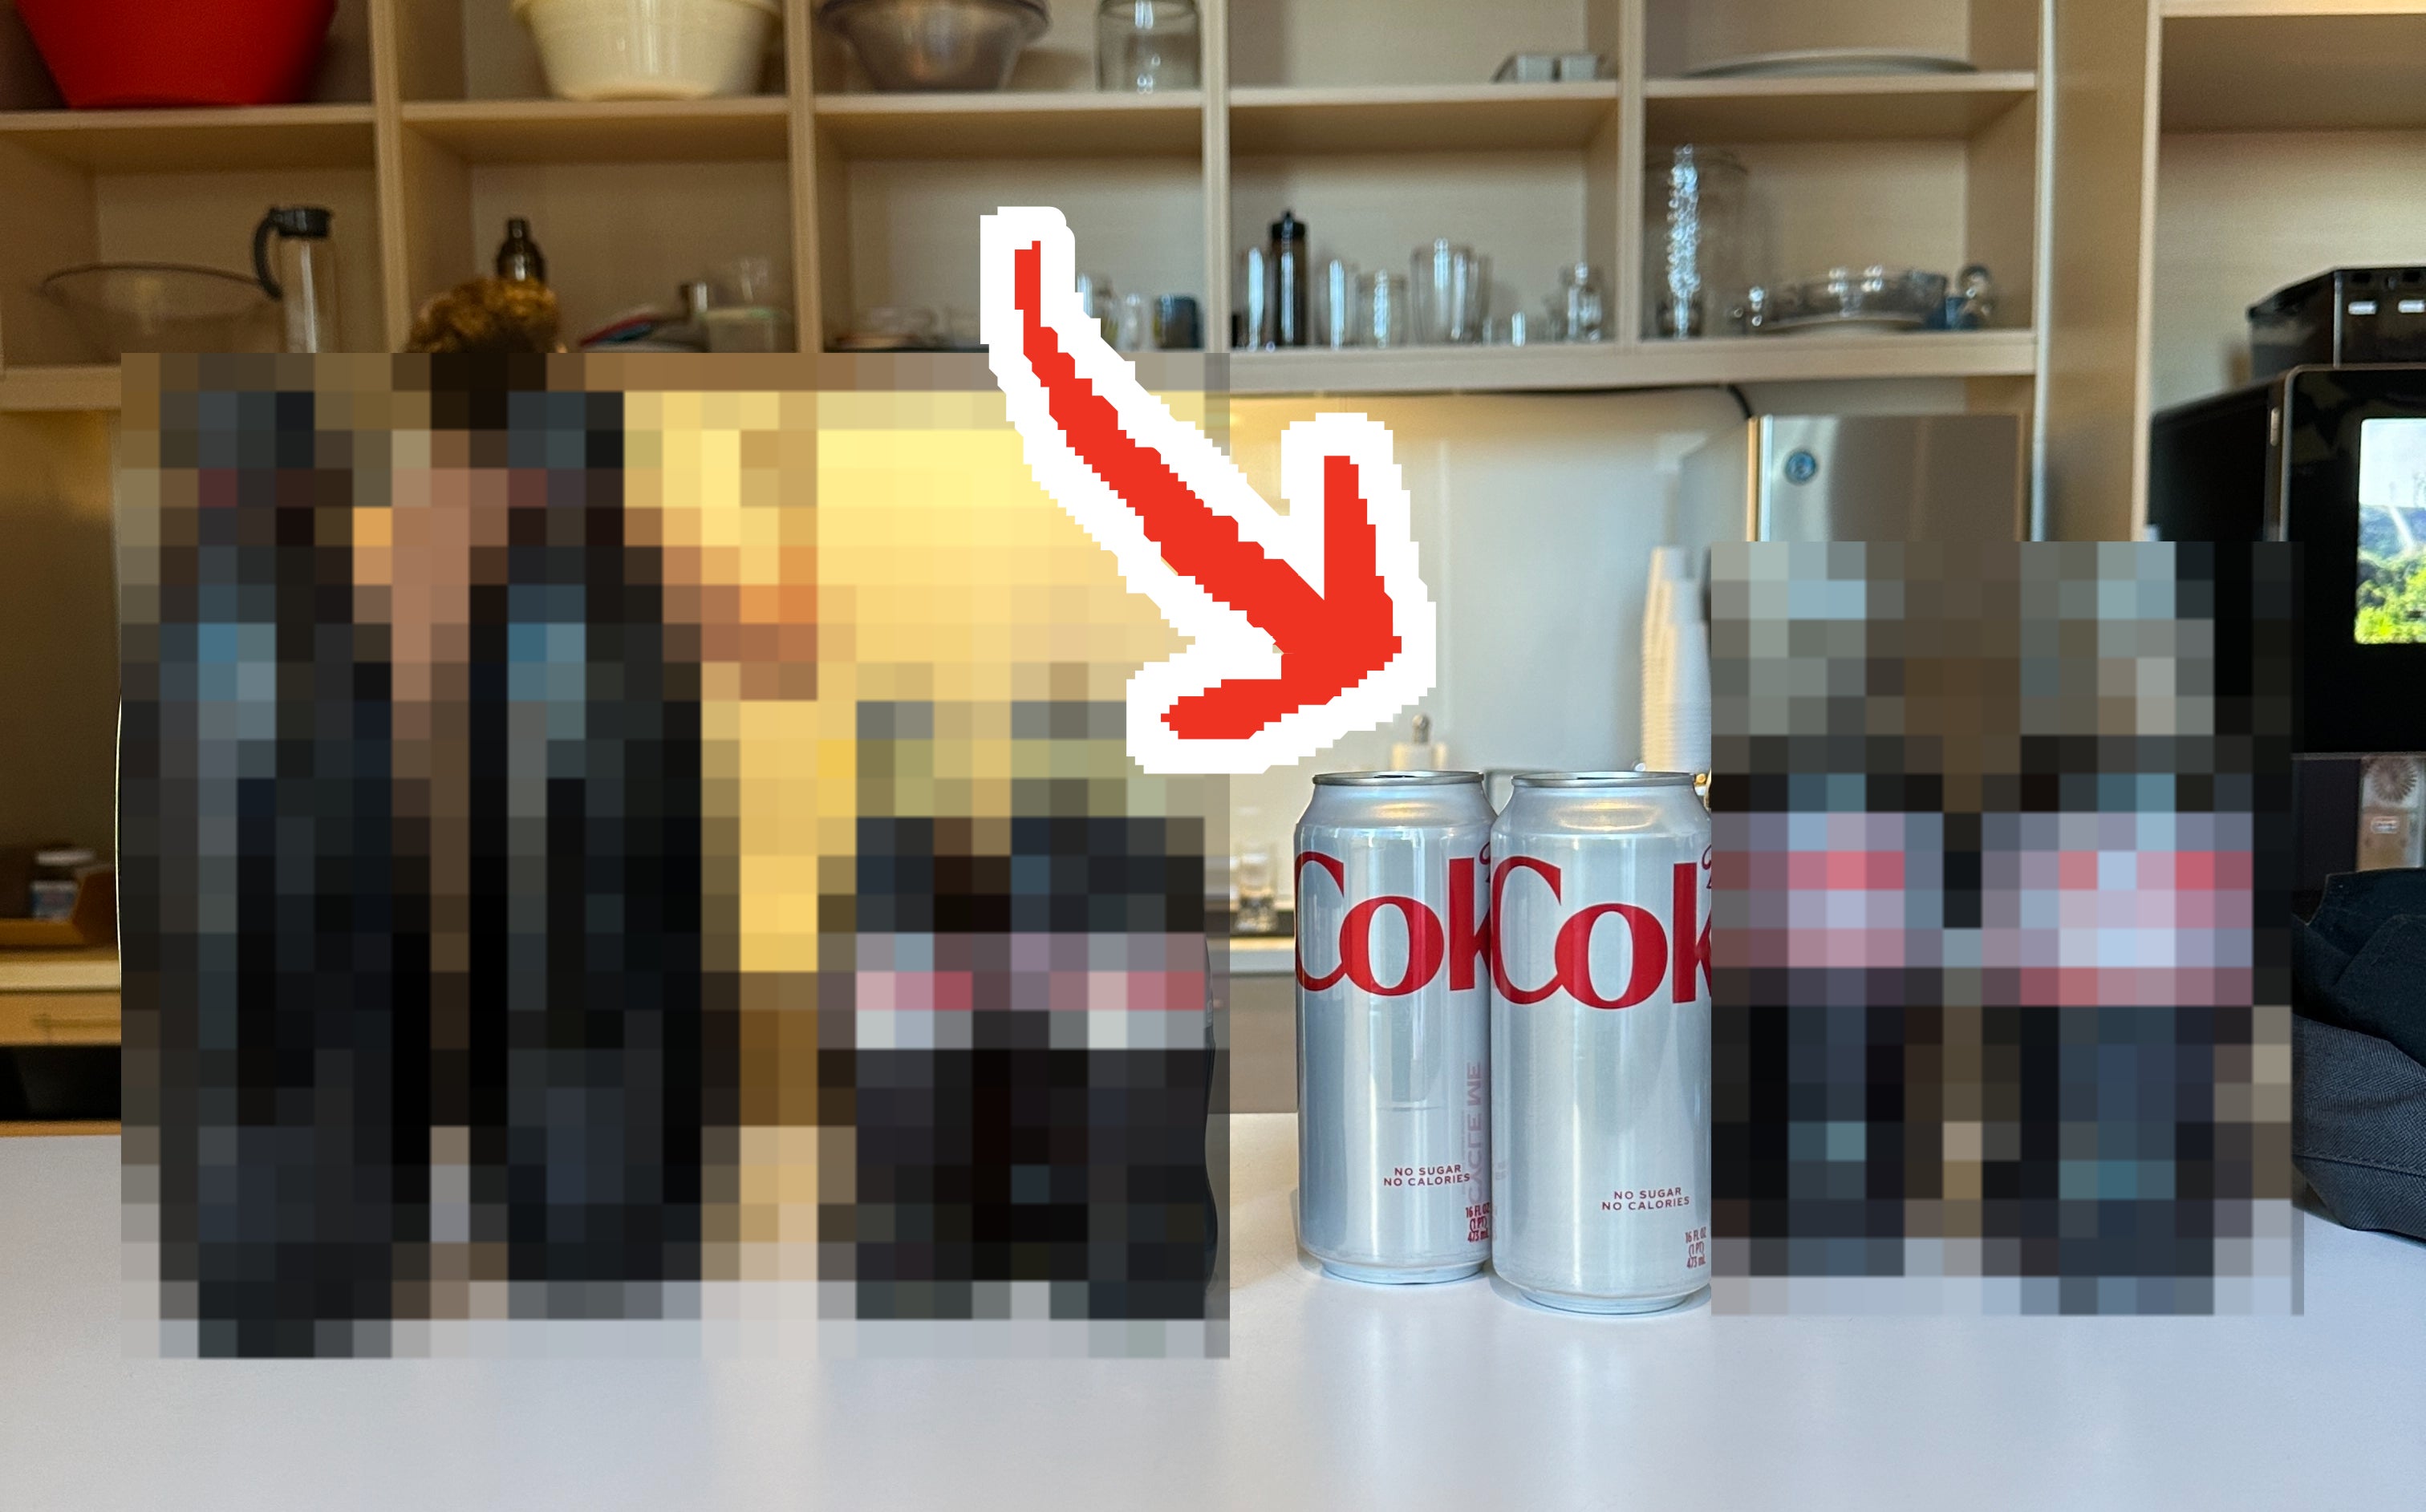 The four different types of Diet Coke lined up on a table, with an arrow pointing to the can